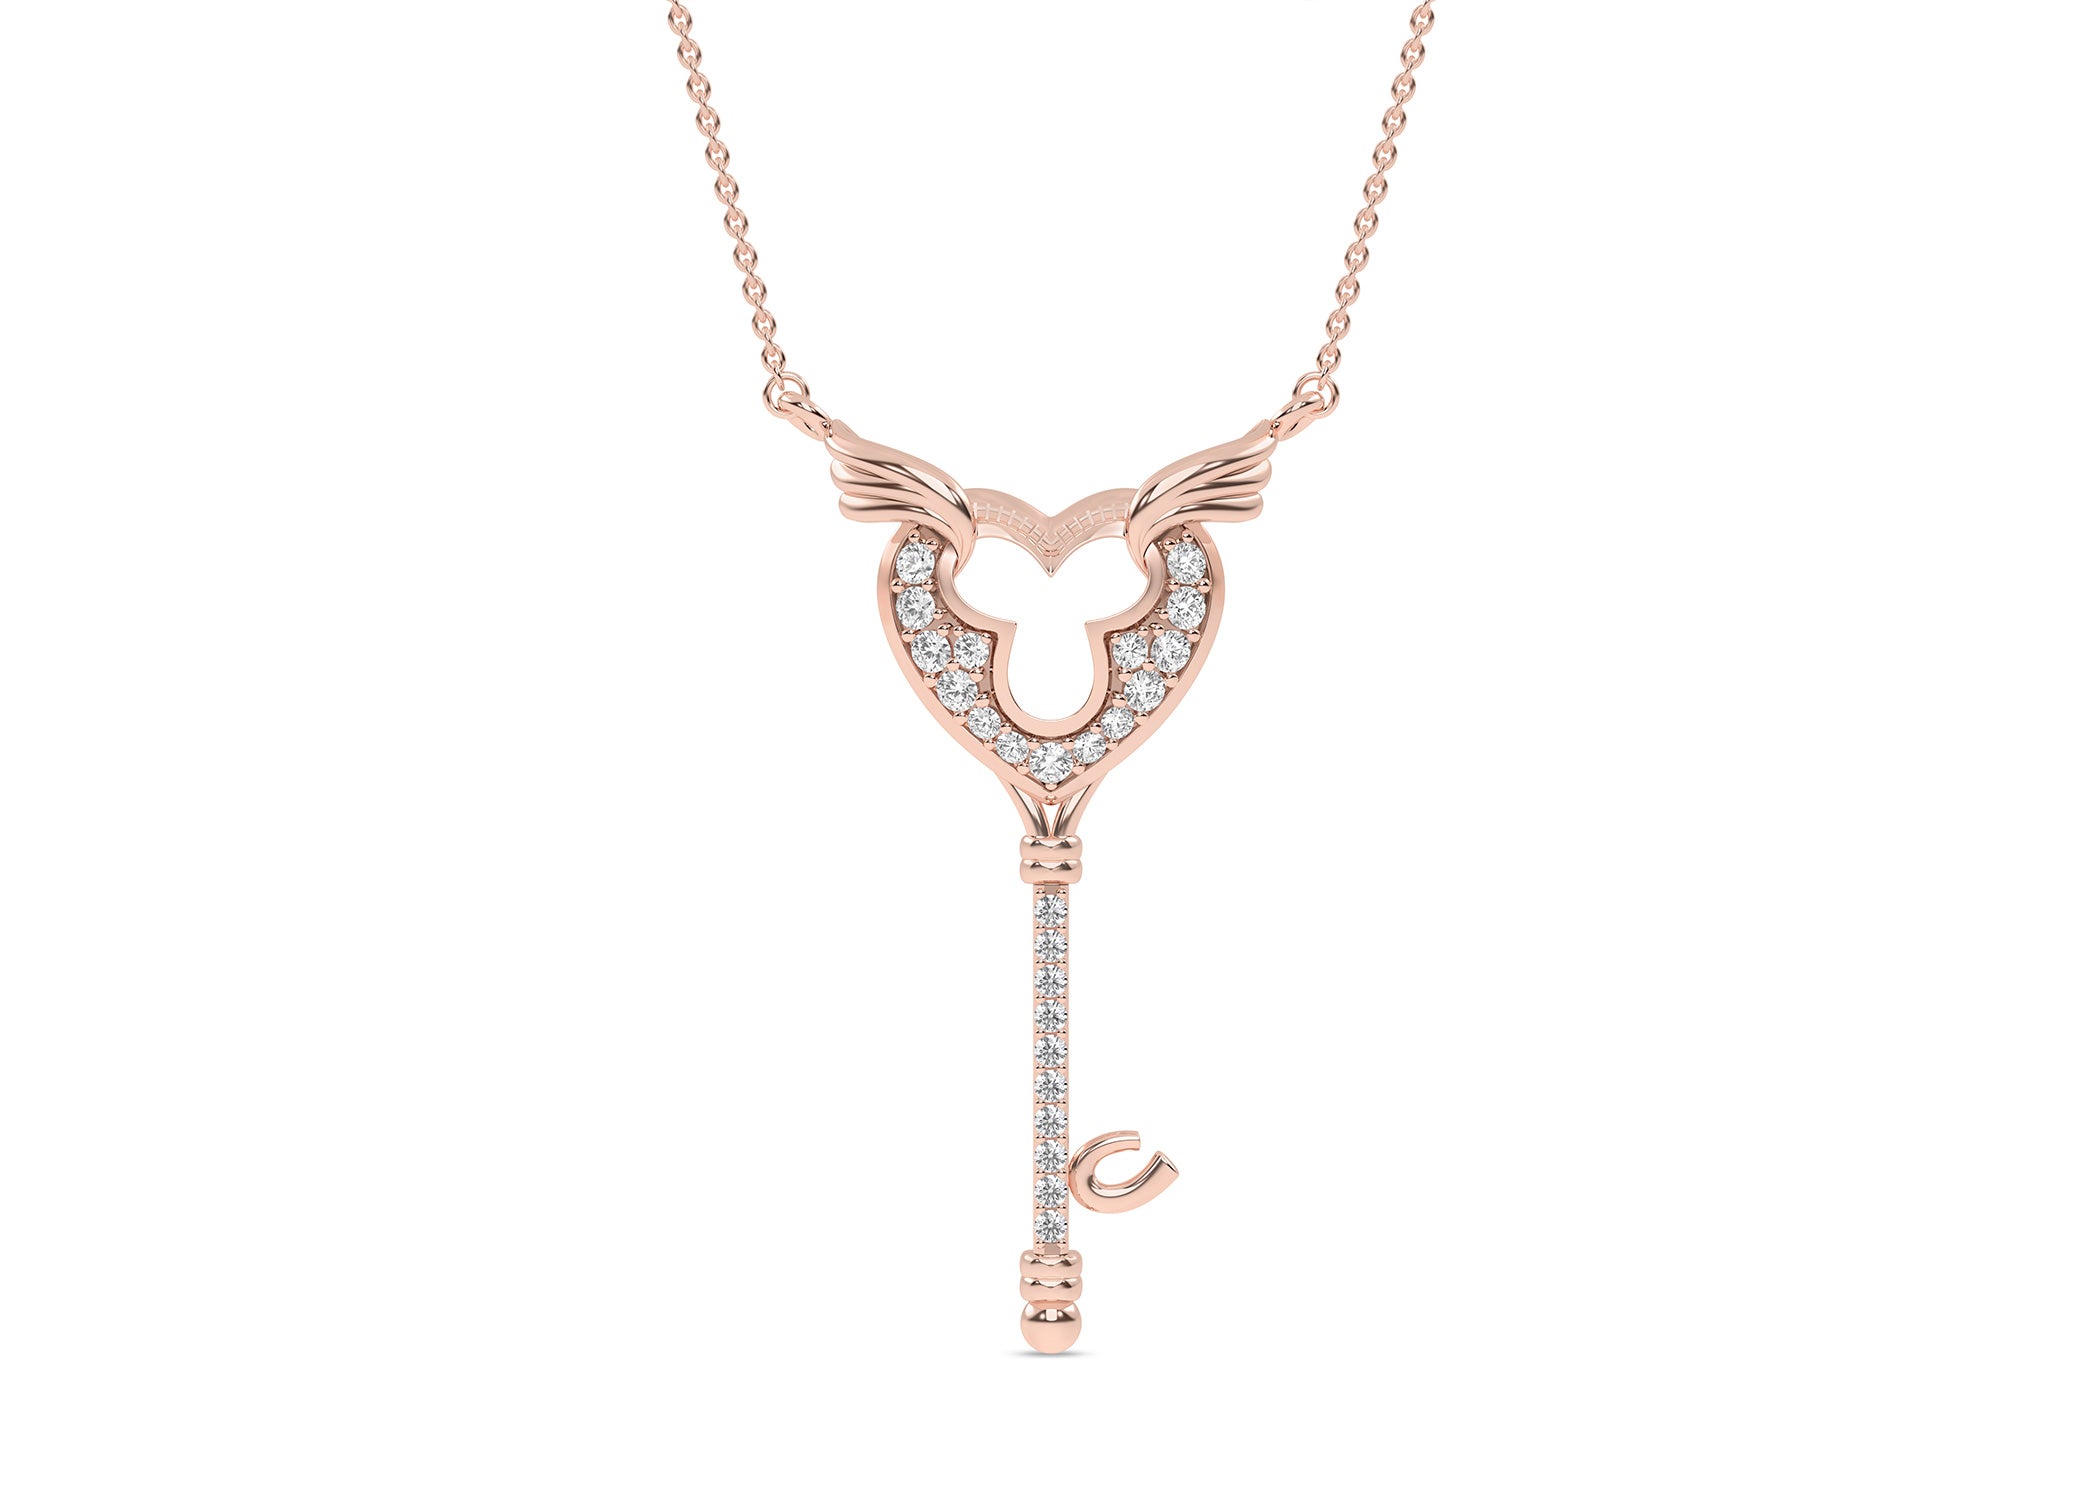 Darling Wings Key Necklace - Necklace 